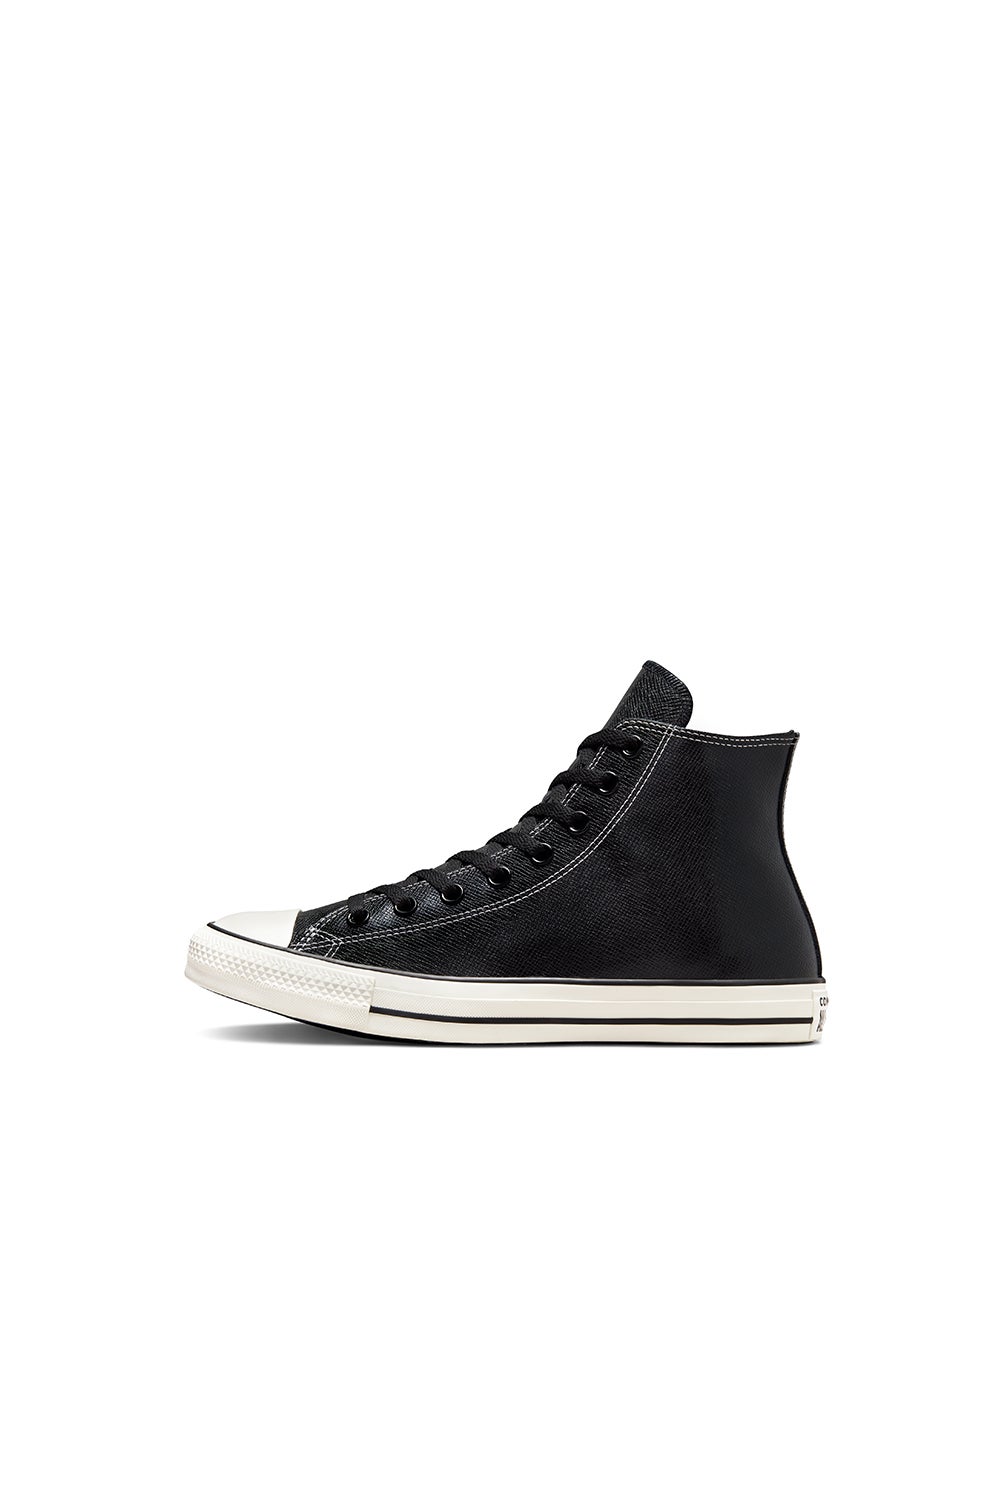 Converse Chuck Taylor All Star Embossed Leather High Top Black